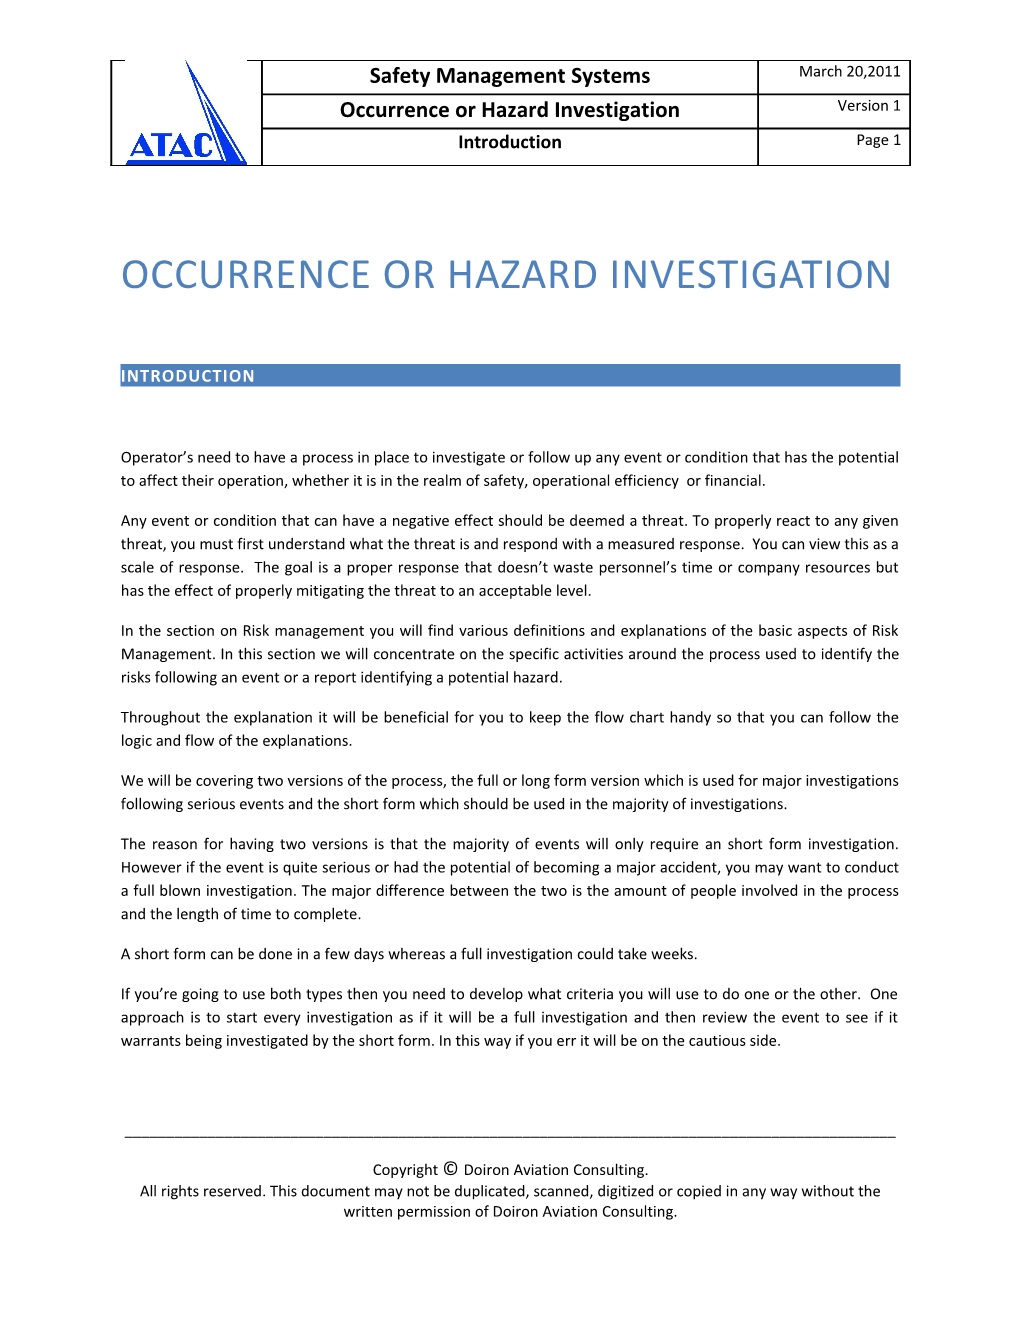 Occurrence Or Hazard Investigation